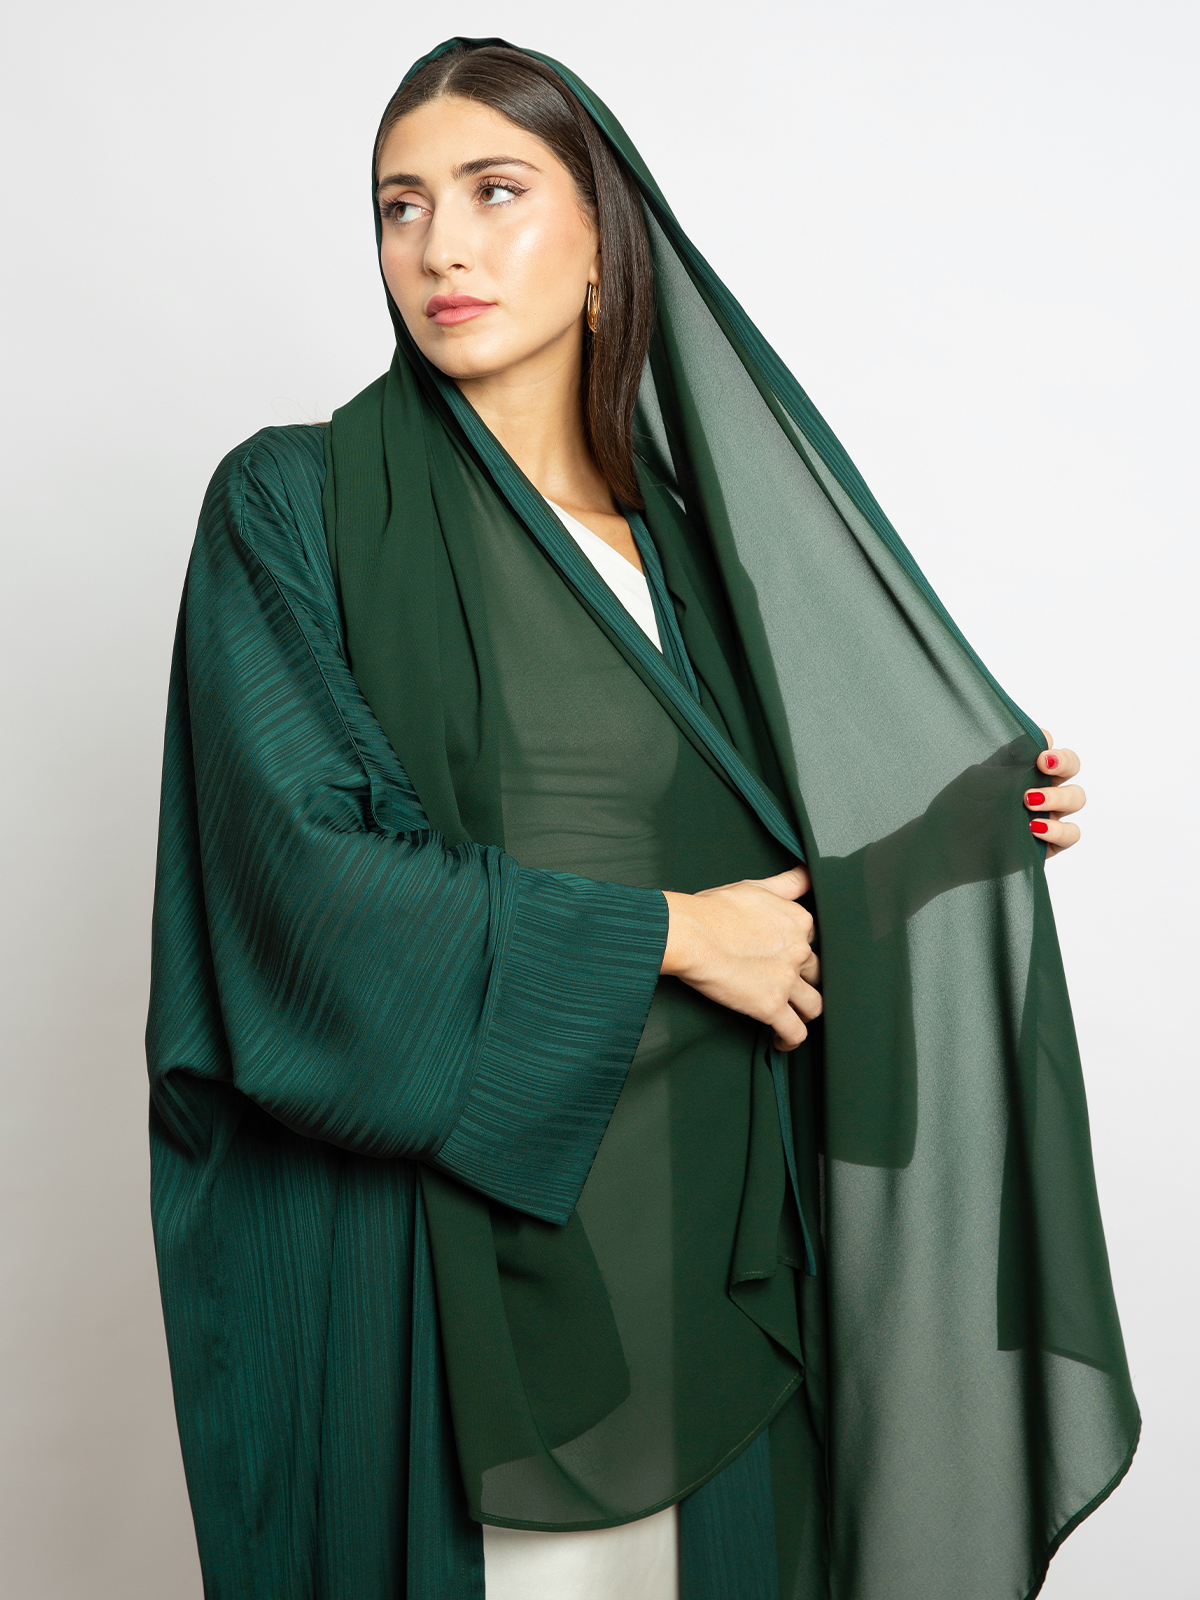 Long open wide cut abaya in green stripes color with regular sleeves for special occasions and events